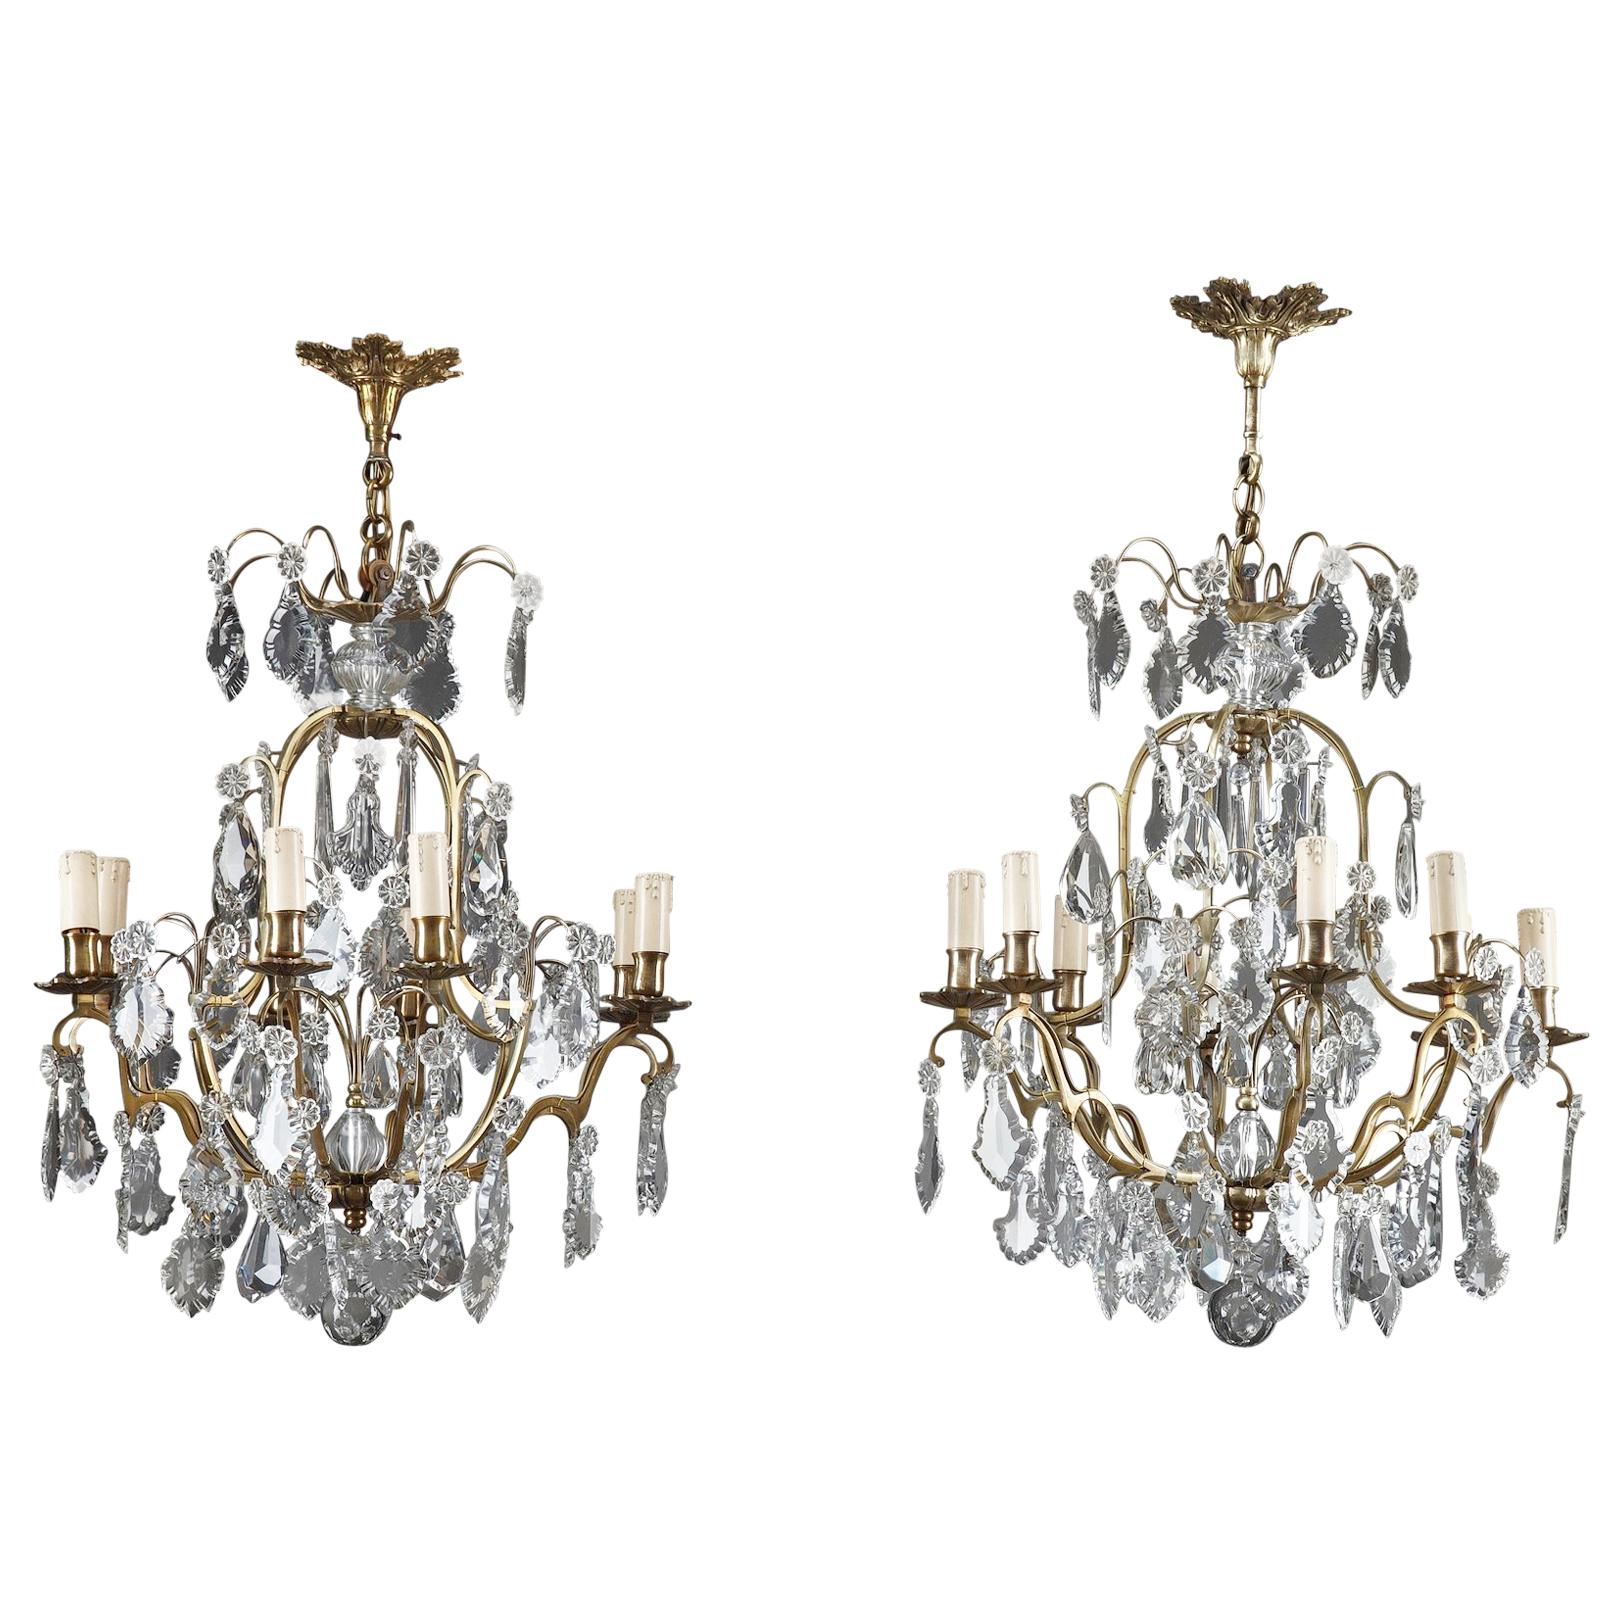 Late 19th Century Crystal and Bronze 8-Light Chandeliers